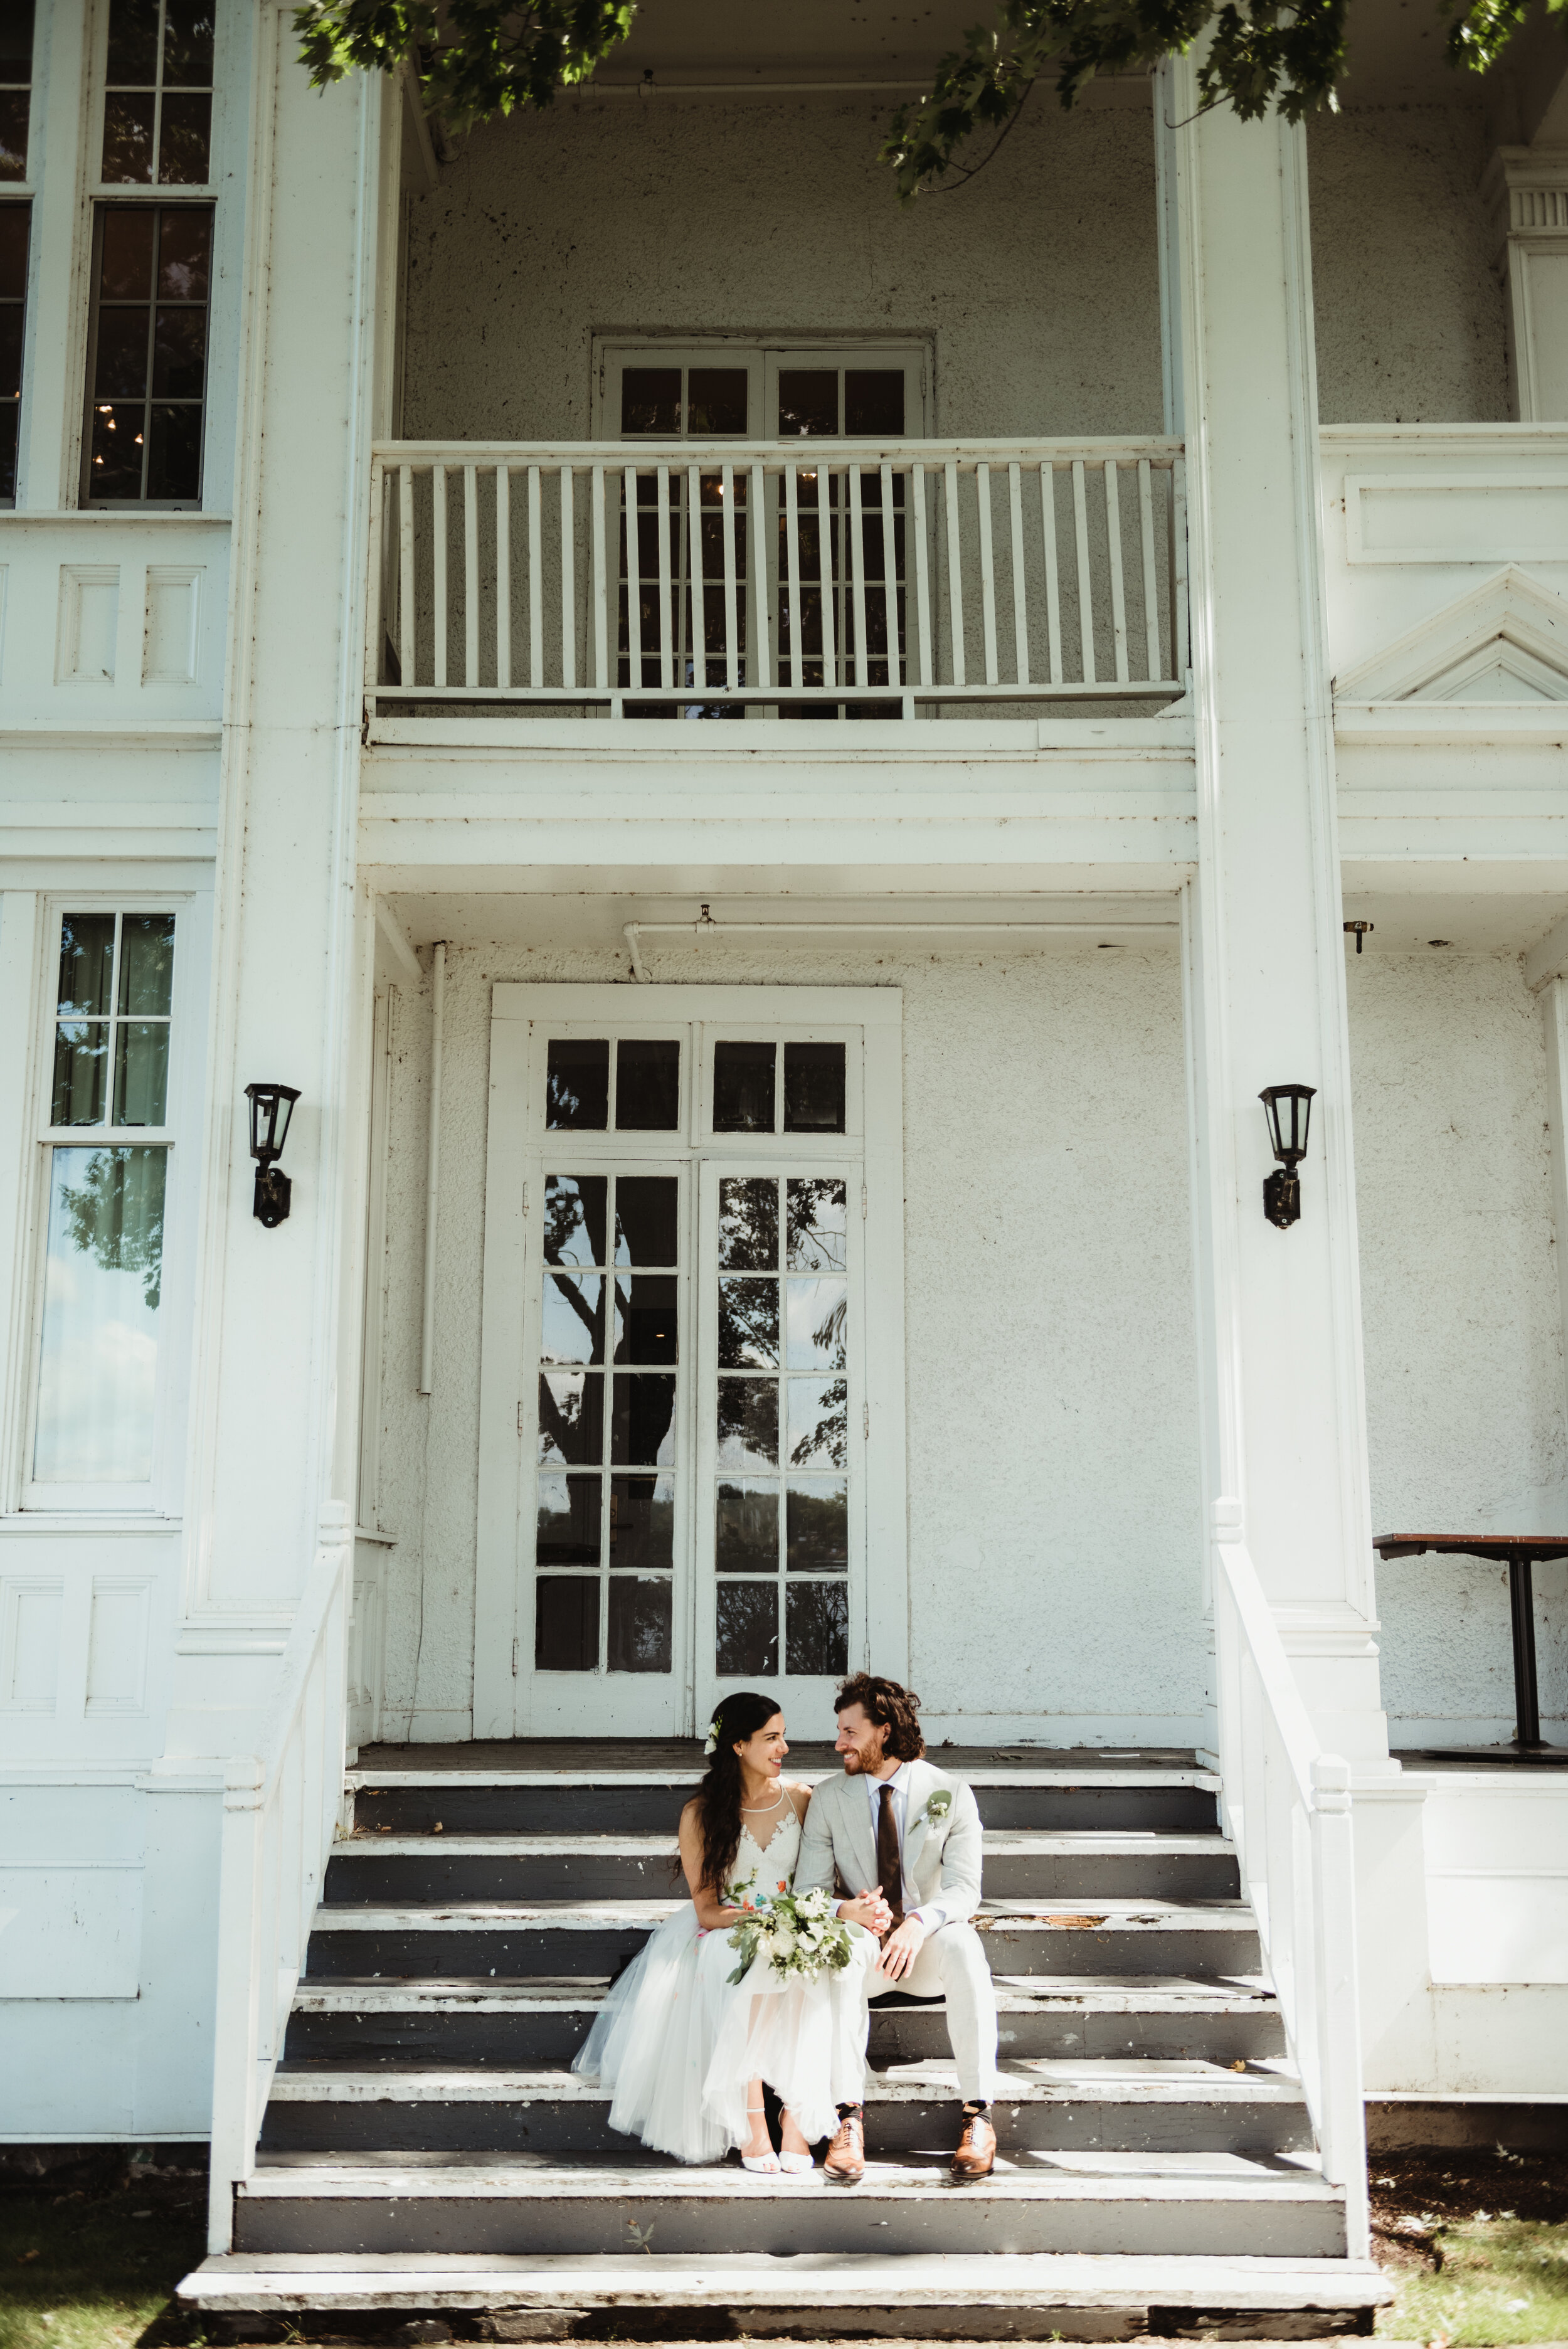 Bride and groom on steps of country house